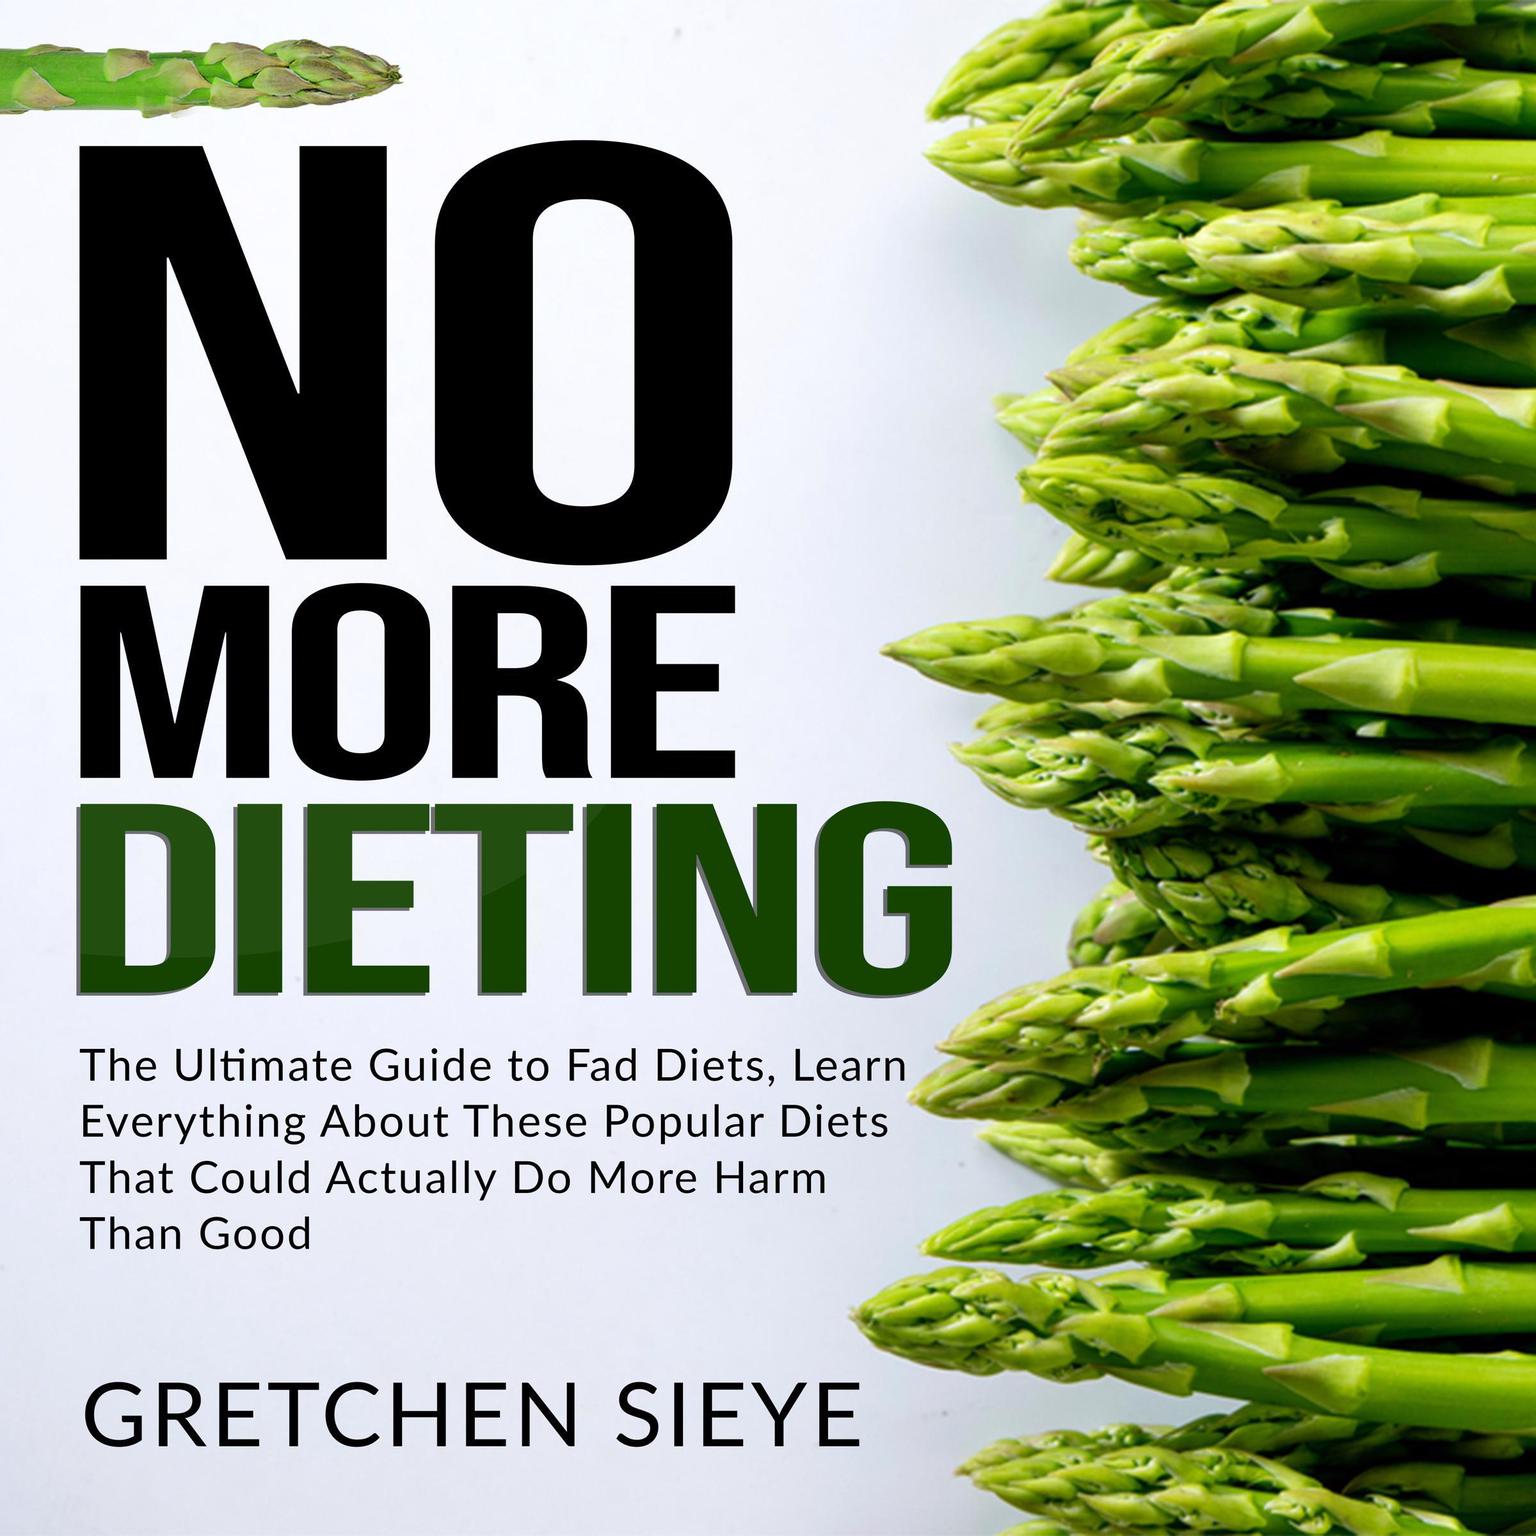 No More Dieting: The Ultimate Guide to Fad Diets, Learn Everything About These Popular Diets That Could Actually Do More Harm Than Good. Audiobook, by Gretchen Sieye